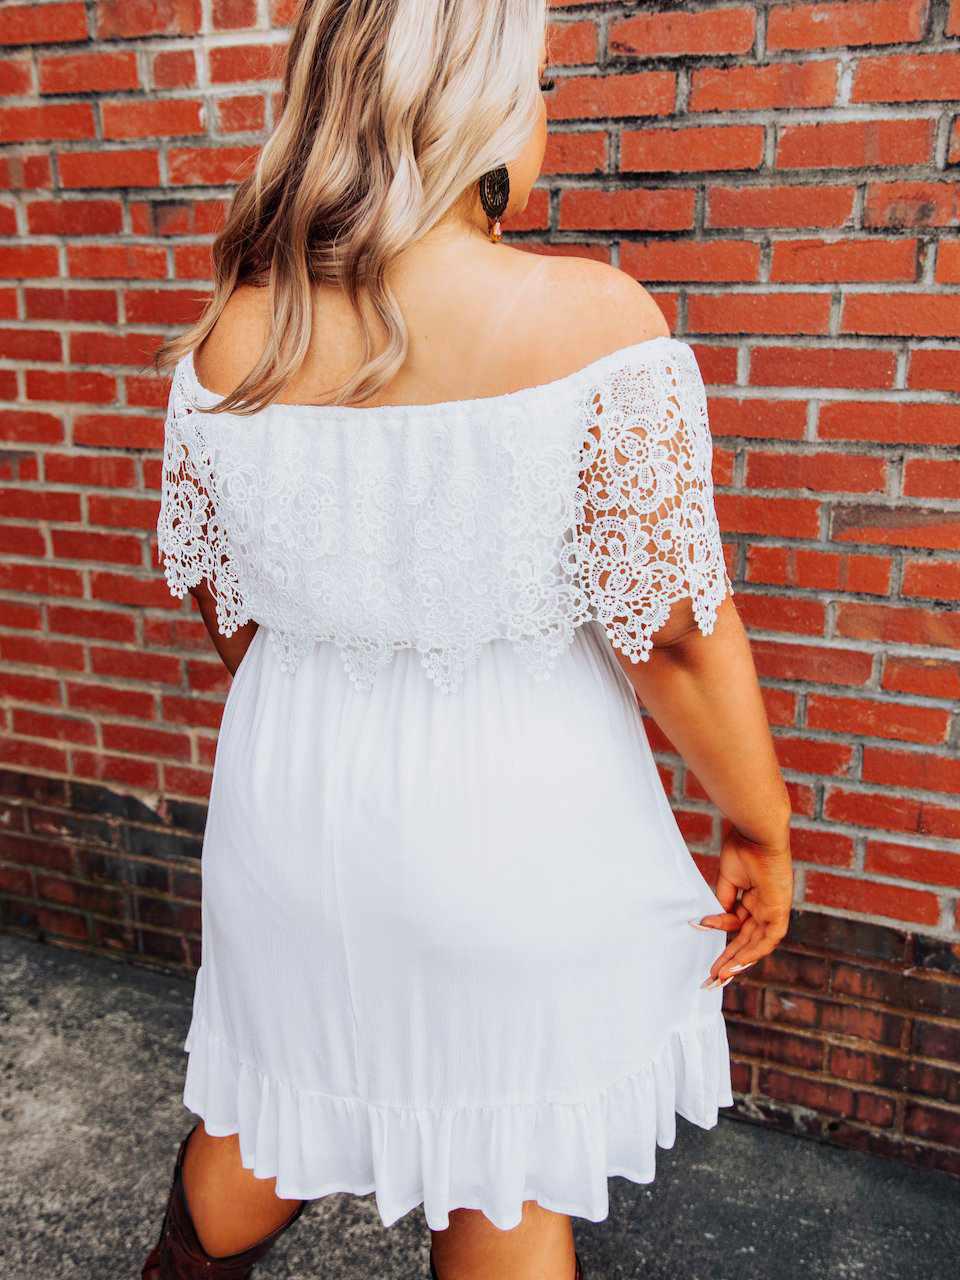 Bride Babes Dress - White-Dresses-Southern Fried Chics